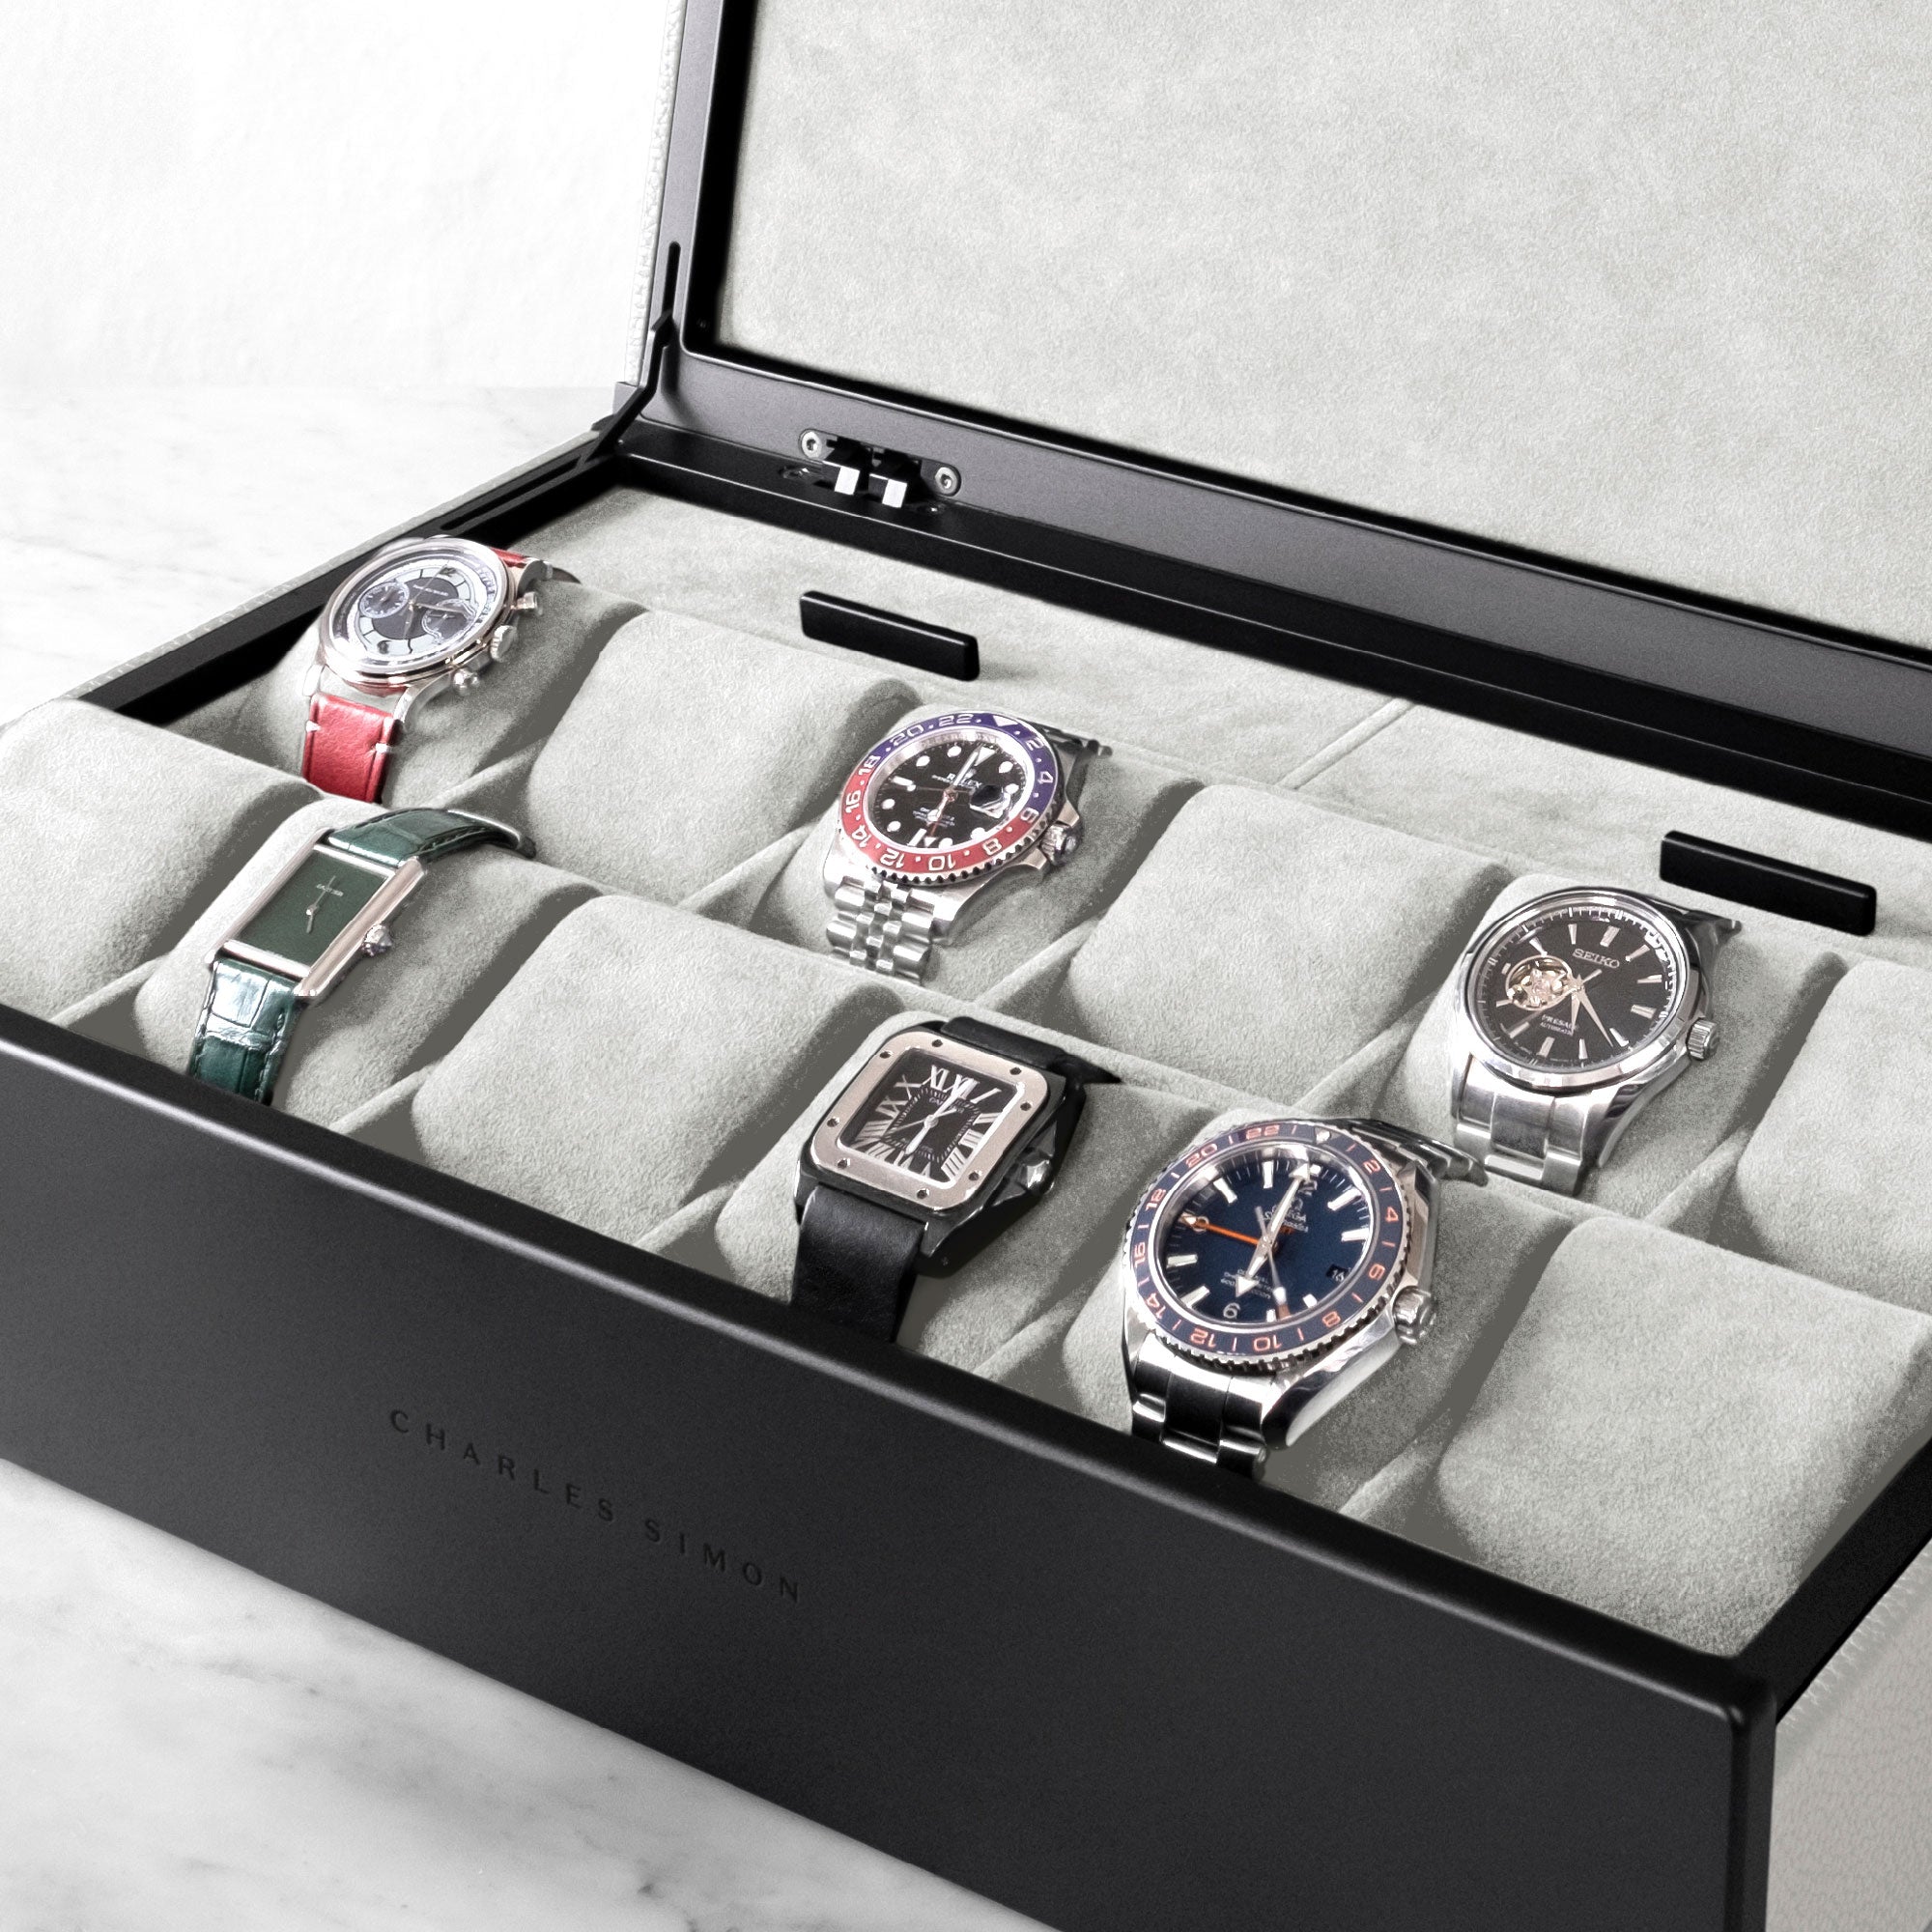 Luxury watches displayed in Spence 12 Watch box in white Alcantara and black casing 